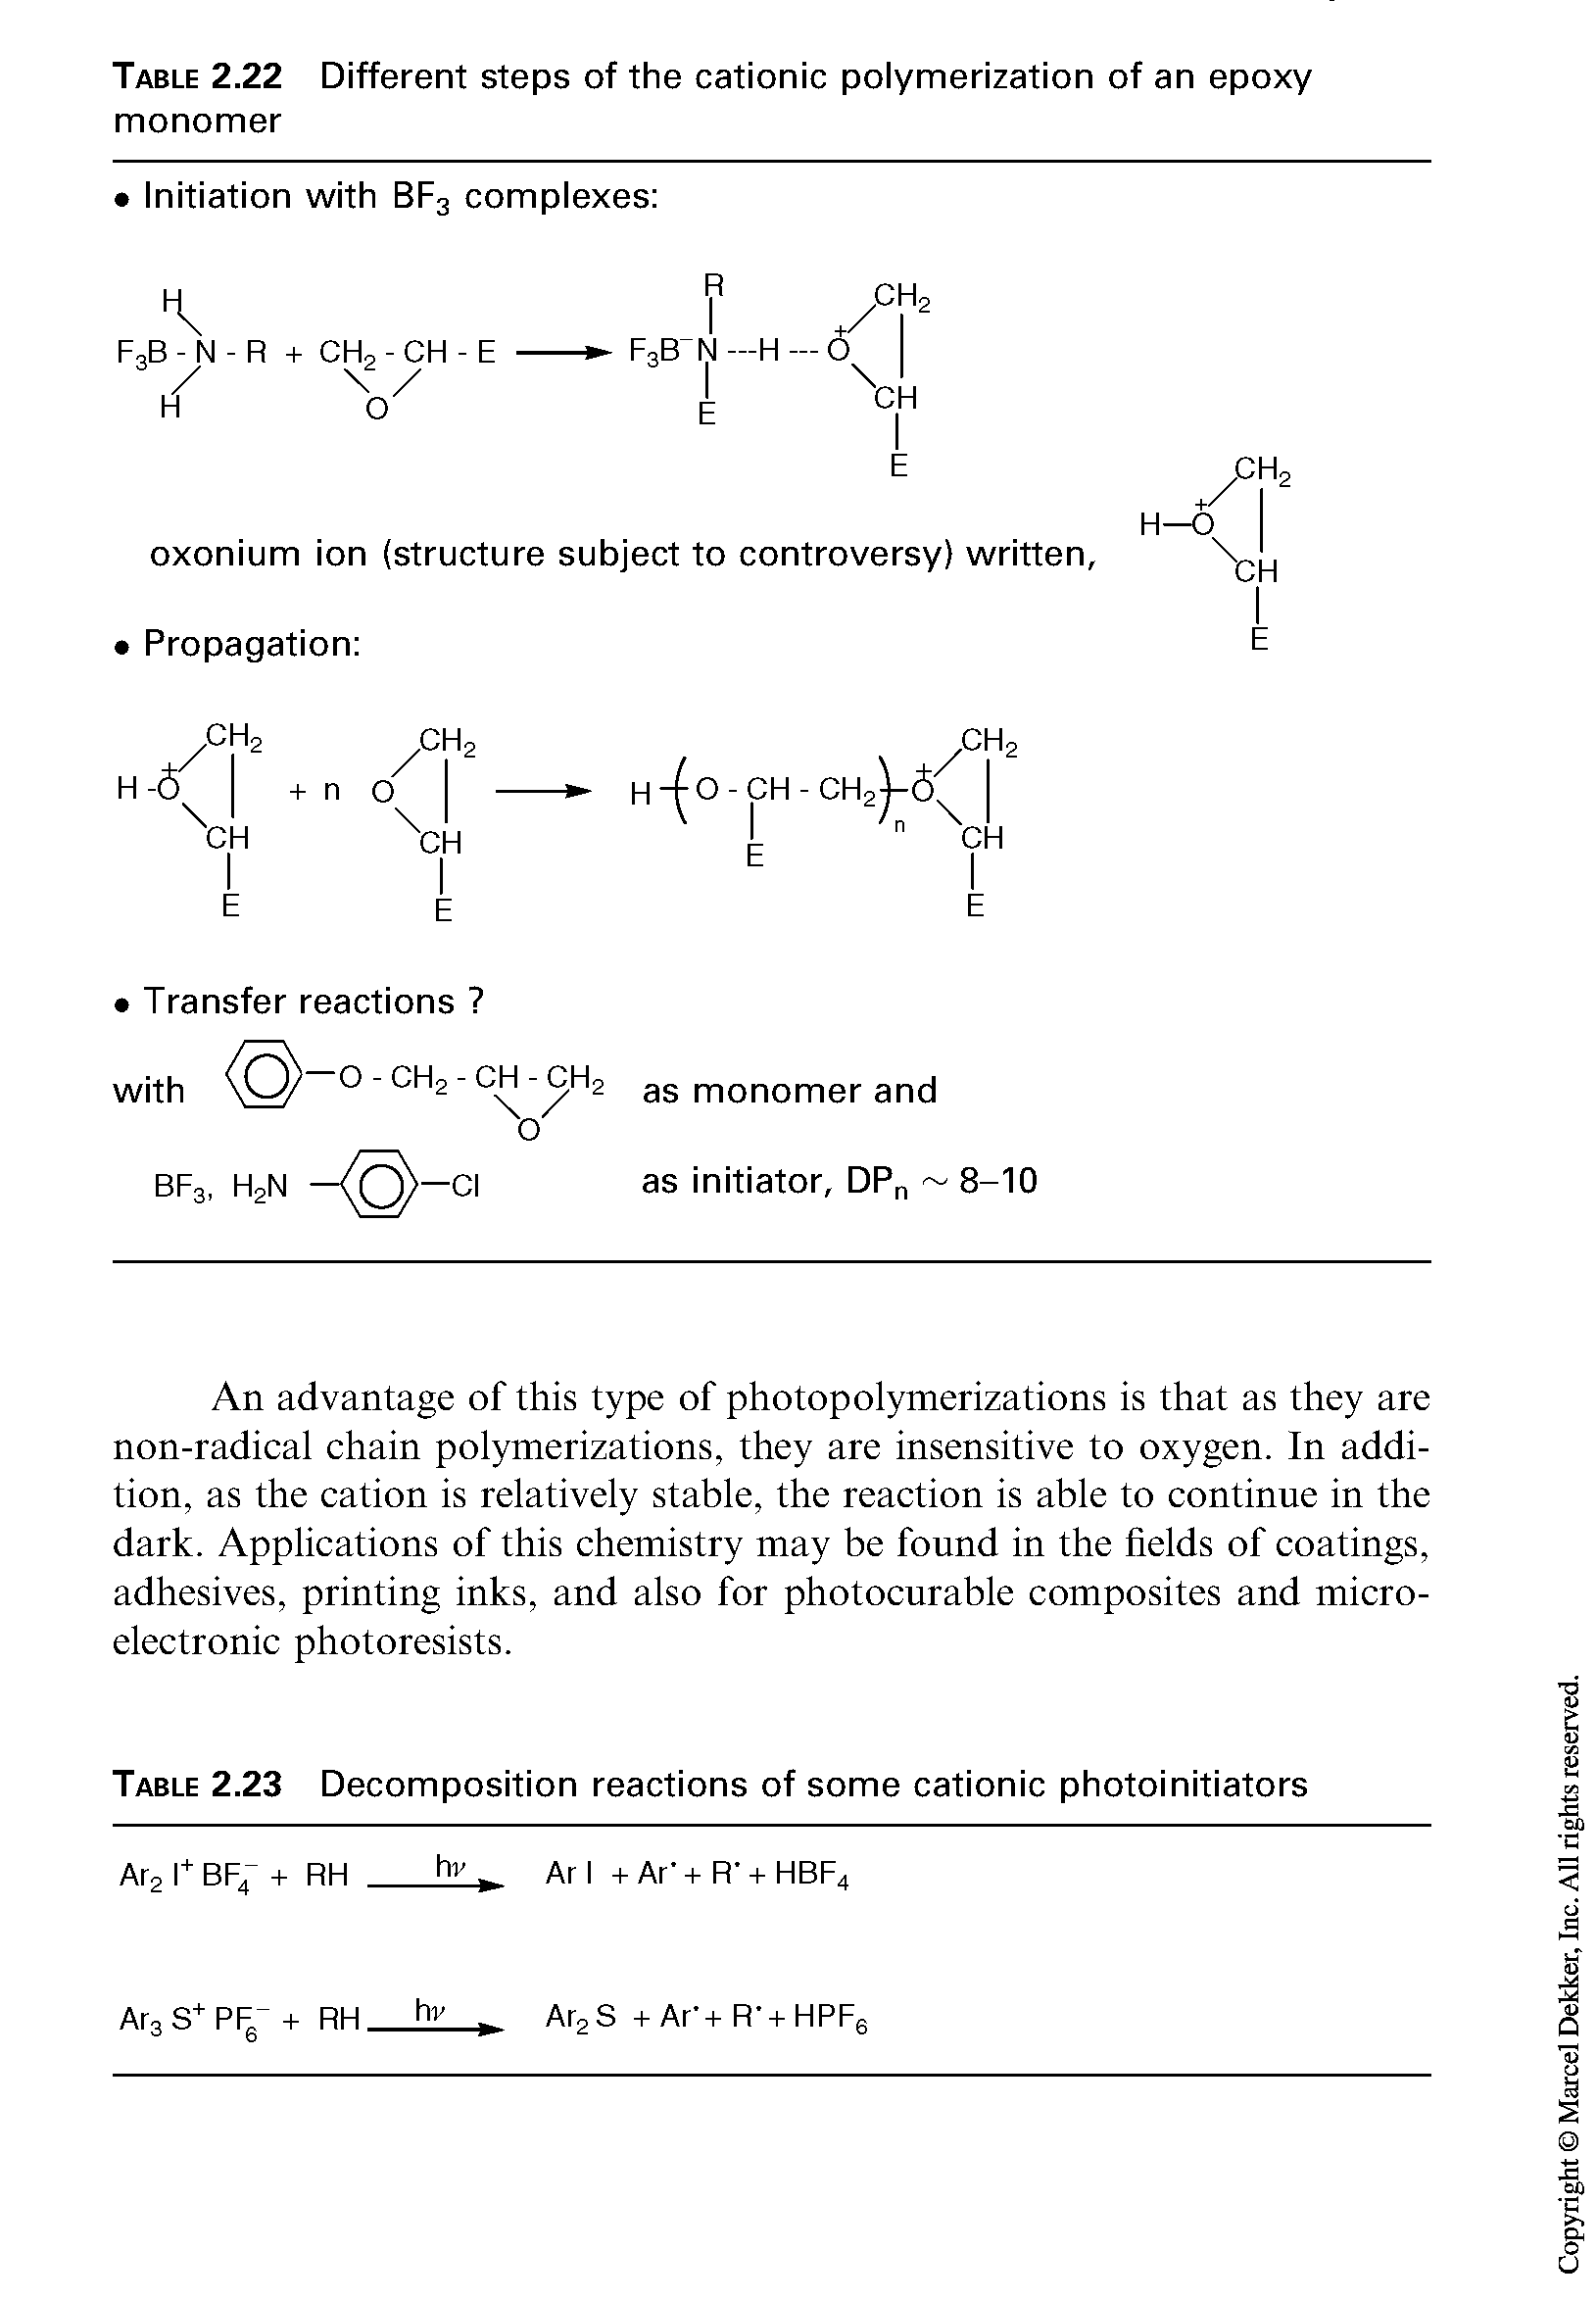 Table 2.23 Decomposition reactions of some cationic photoinitiators...